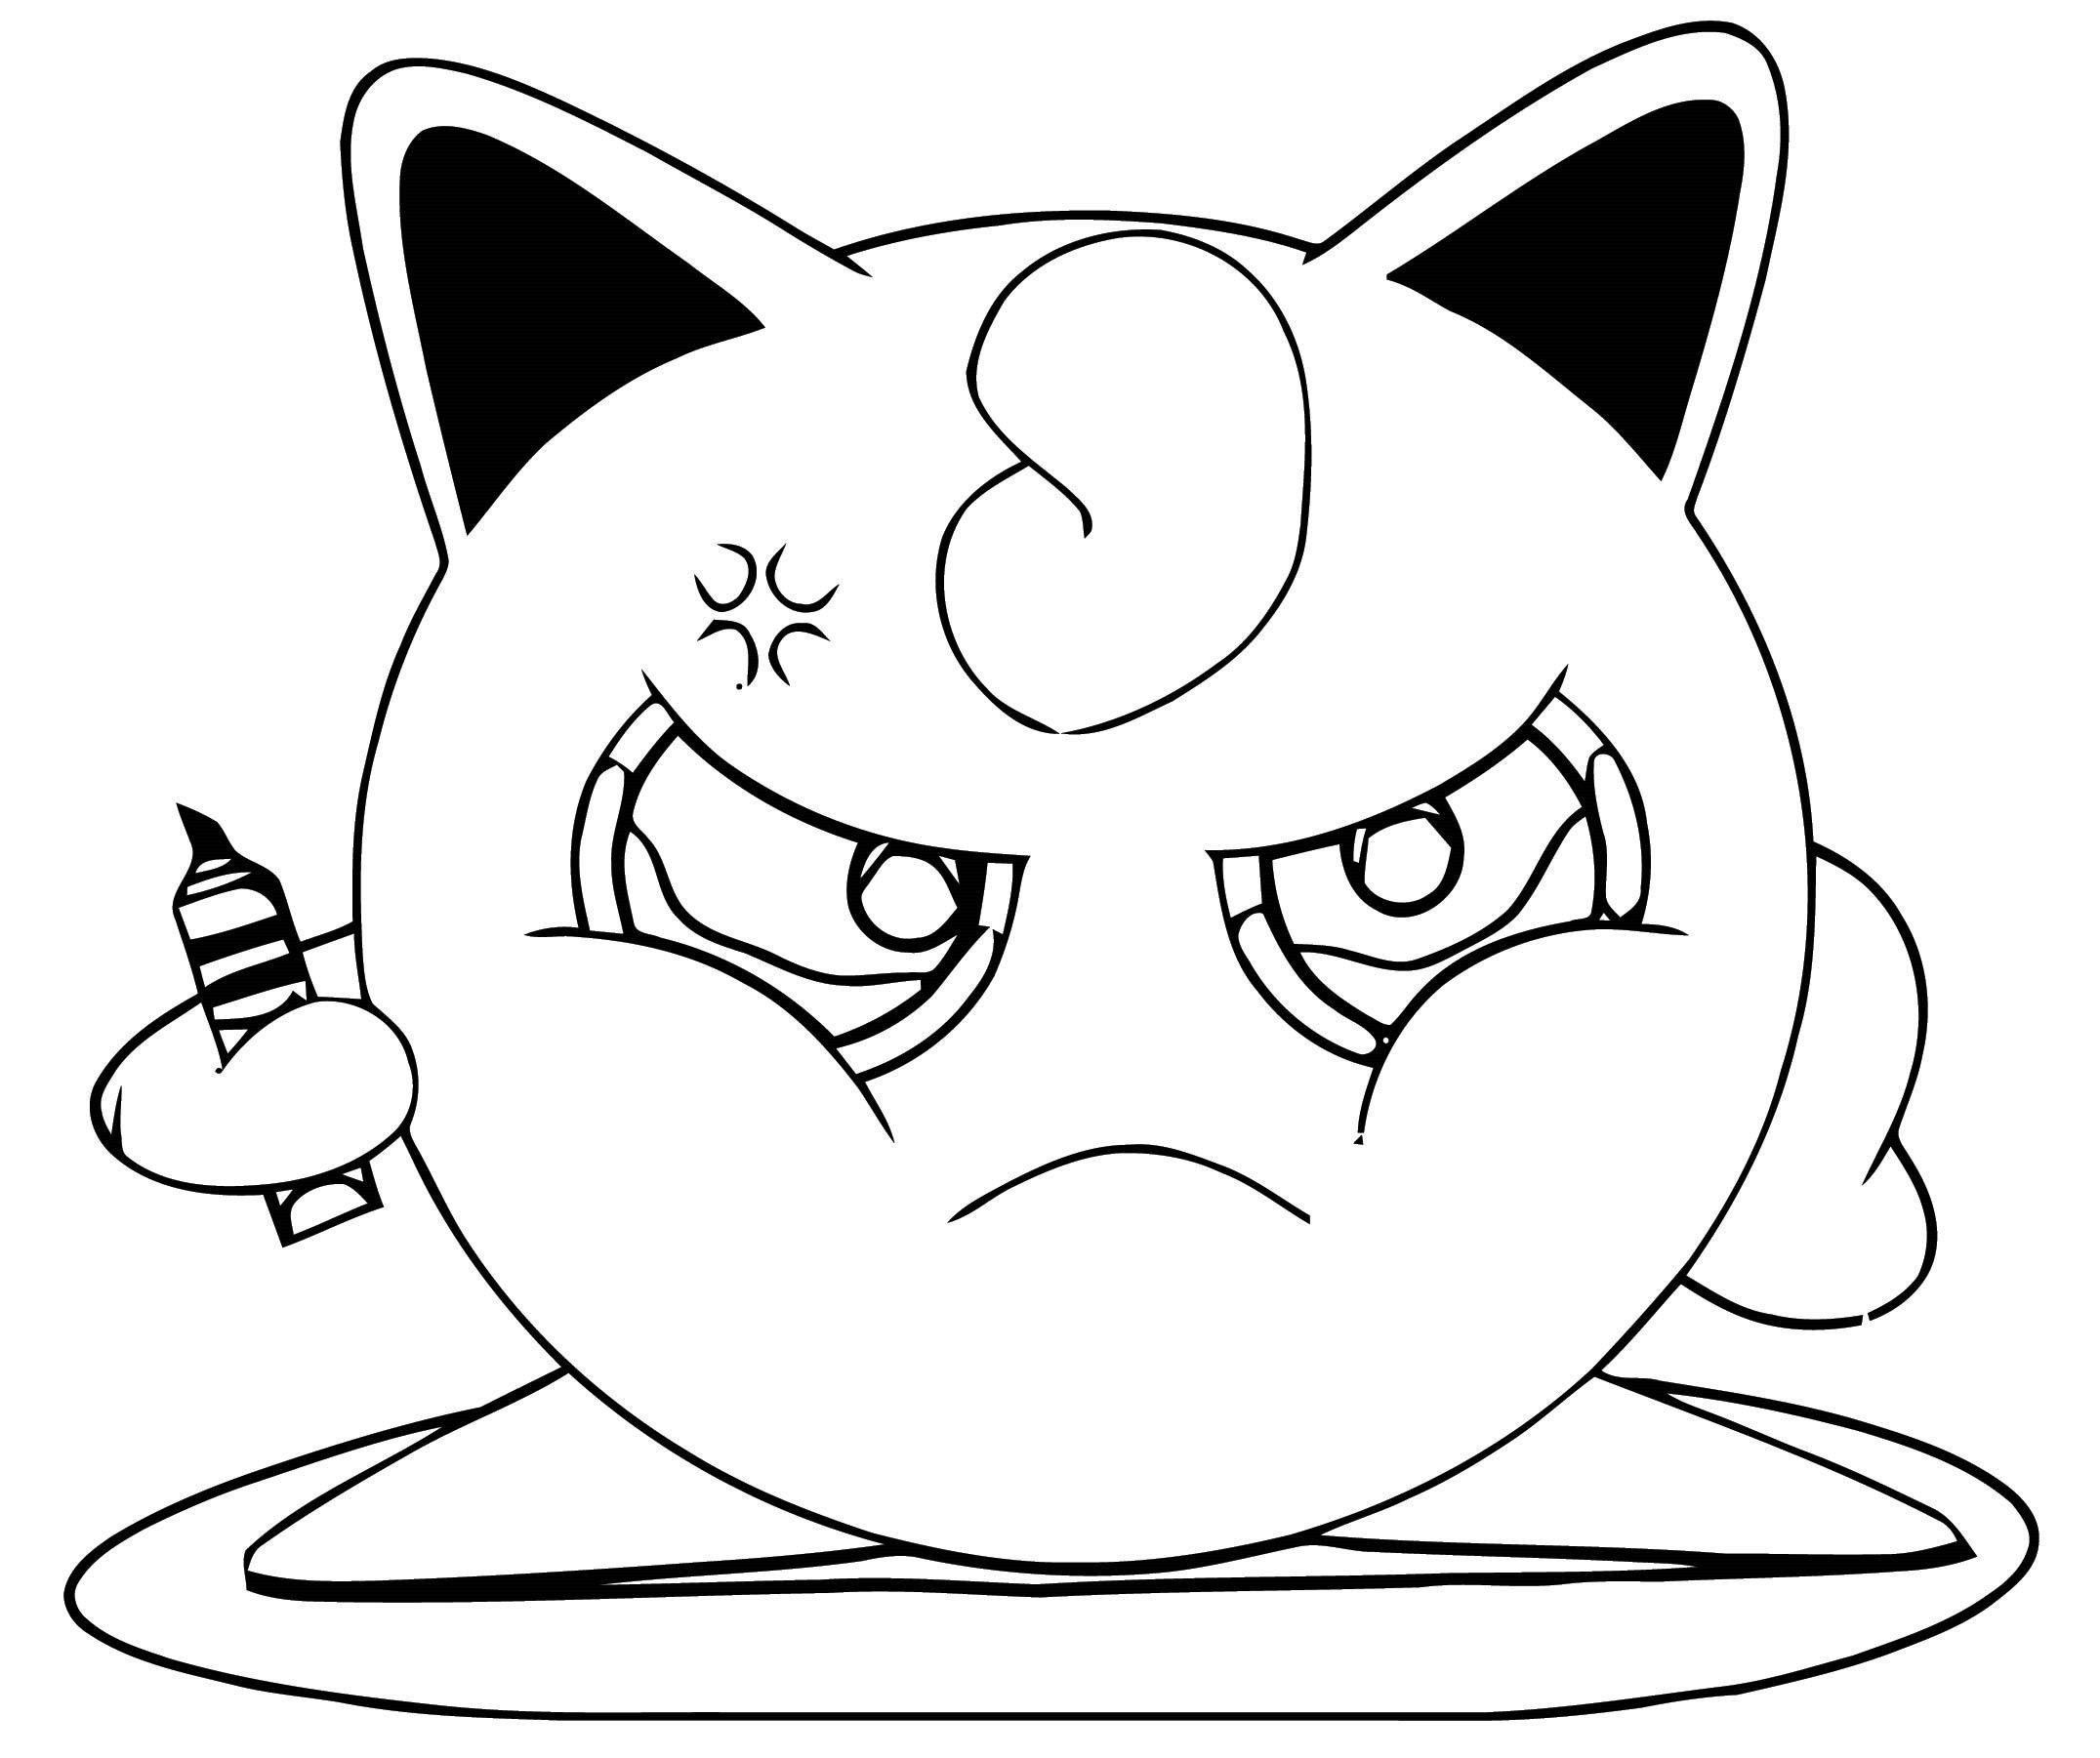 Jigglypuff pokemon images coloring pages pokemon coloring pages pokemon jigglypuff pokemon coloring